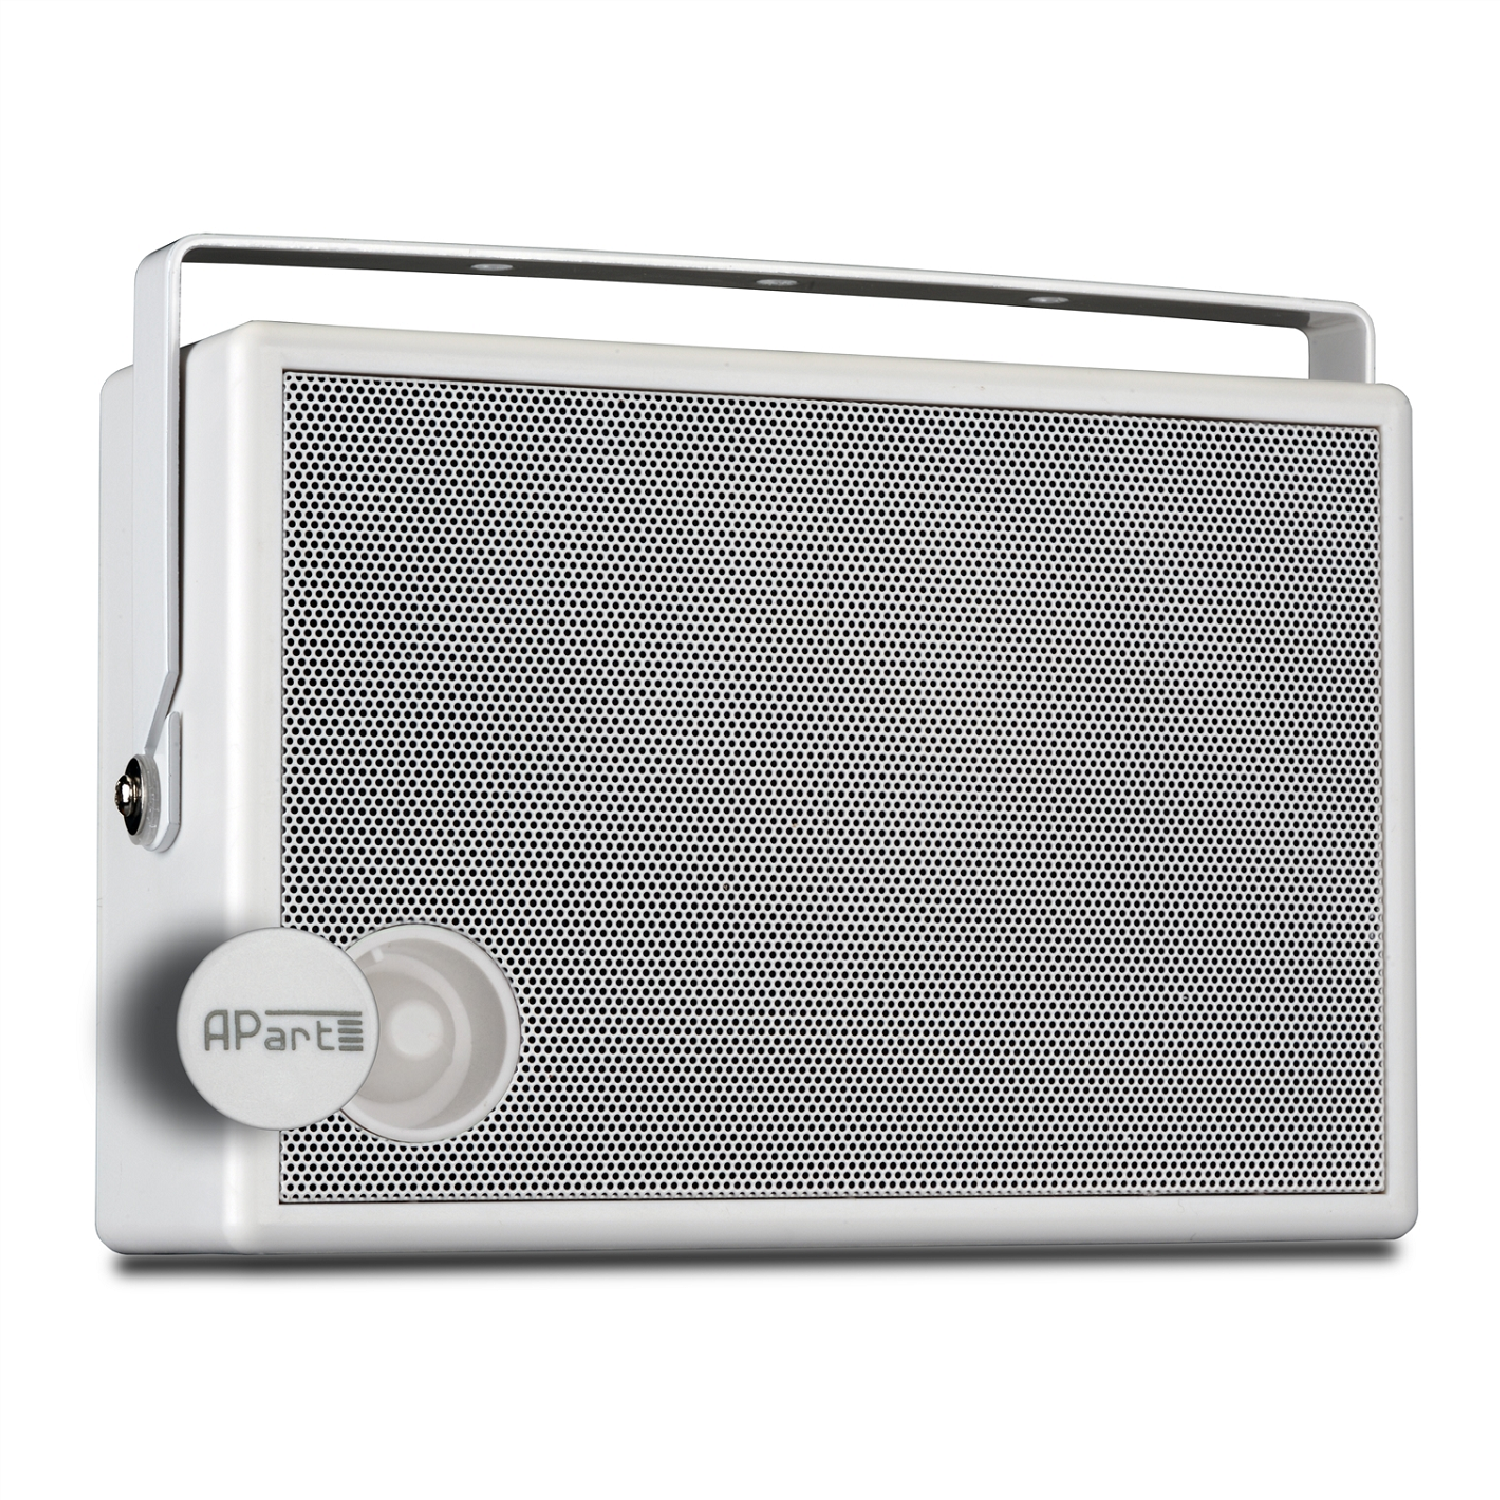 On-wall Speaker with Back Plate and U-bracket, Built-in Volume Control, 100 volt / 6 watts , SMB6V W , APART